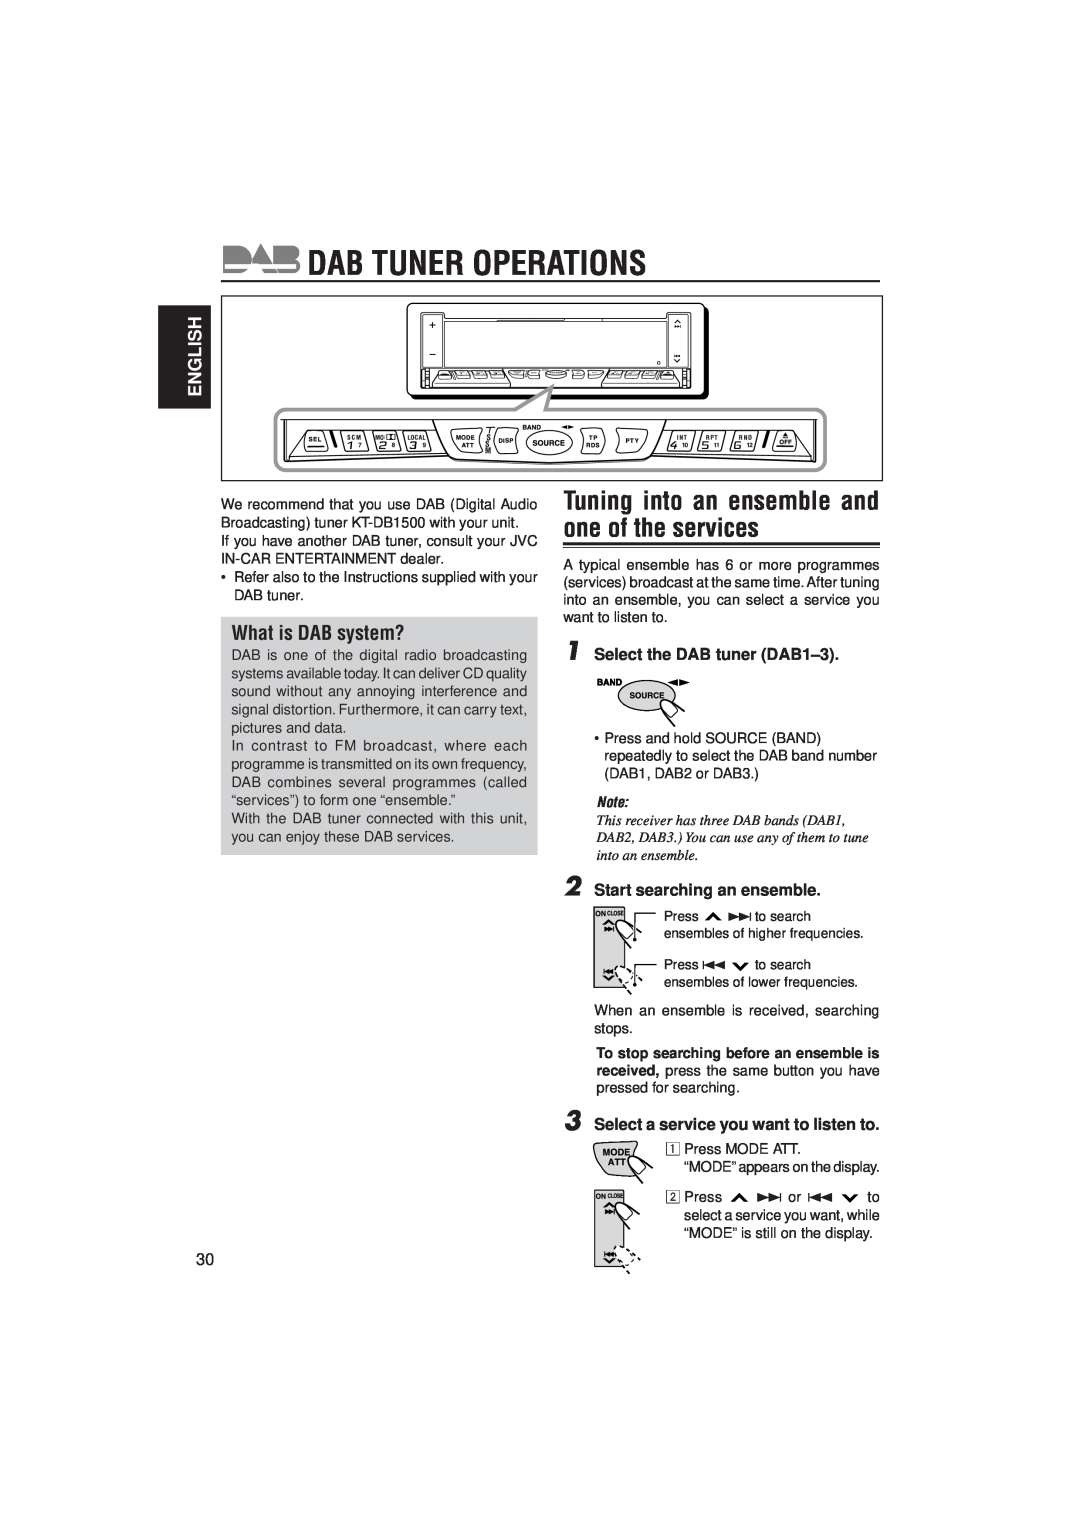 JVC KS-LX200R manual Dab Tuner Operations, Tuning into an ensemble and one of the services, What is DAB system?, English 